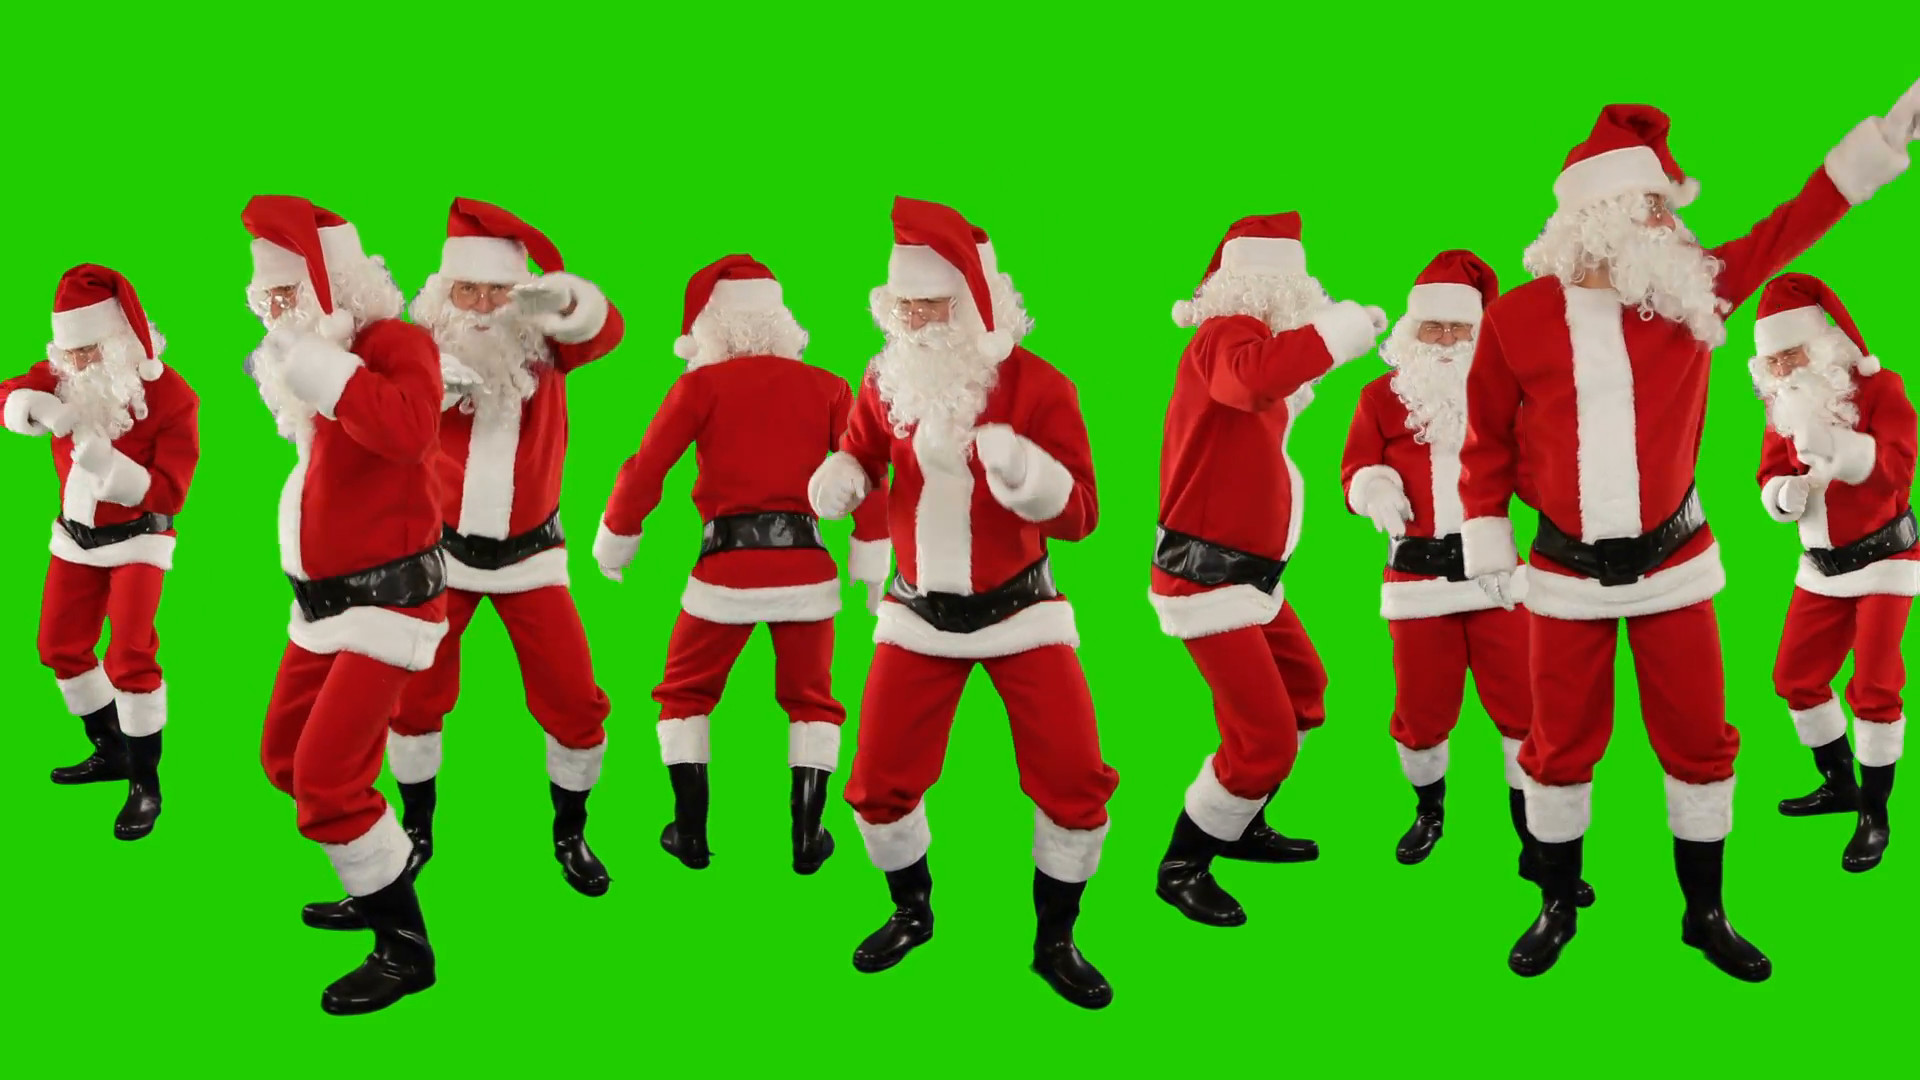 1920x1080 Bunch of Santa Claus Dancing, Christmas Holiday Background, Green Screen  Stock Video Footage - Storyblocks Video